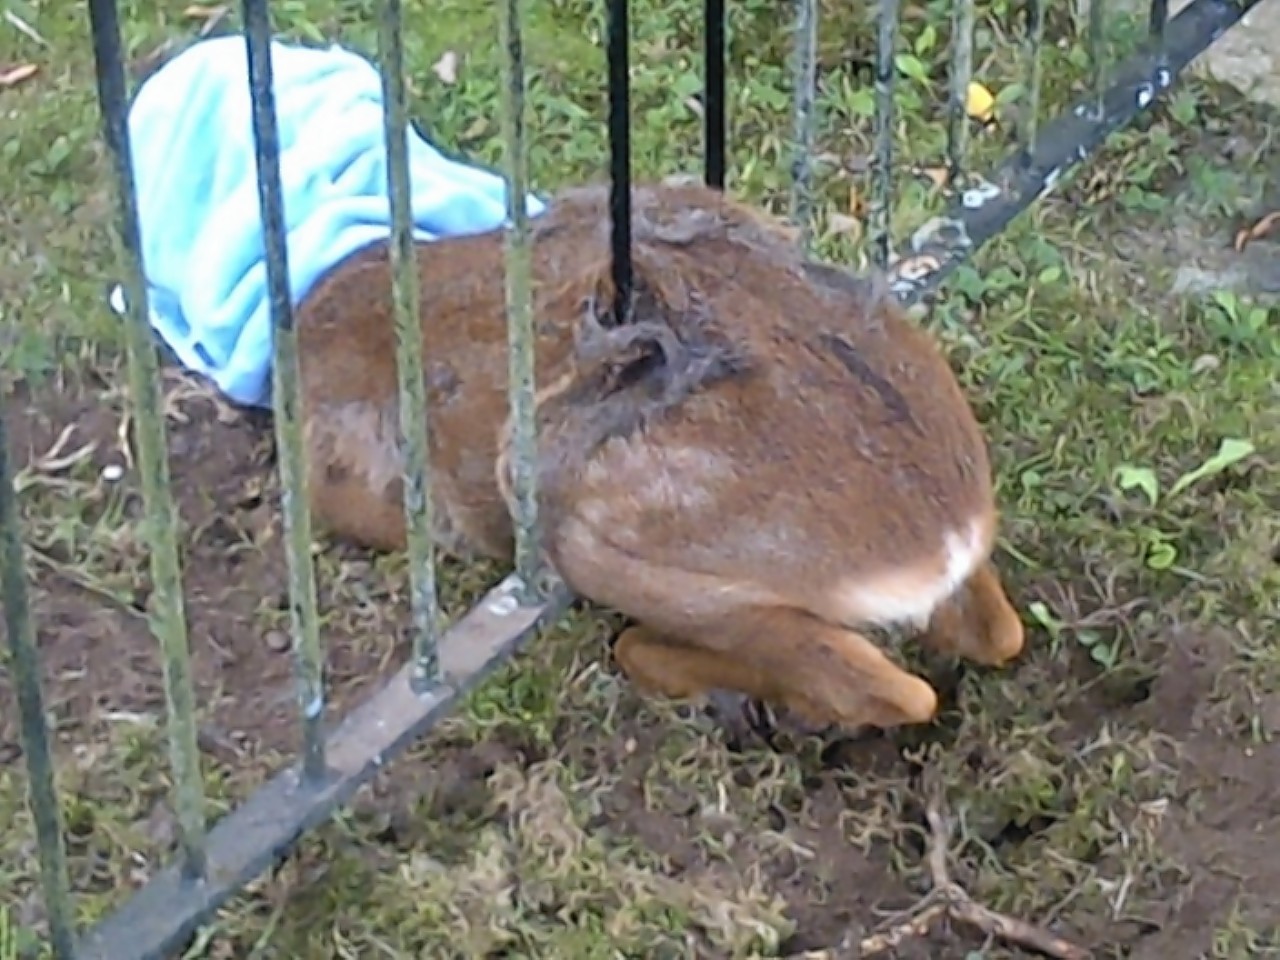 The young deer trapped in the fence in Inverness